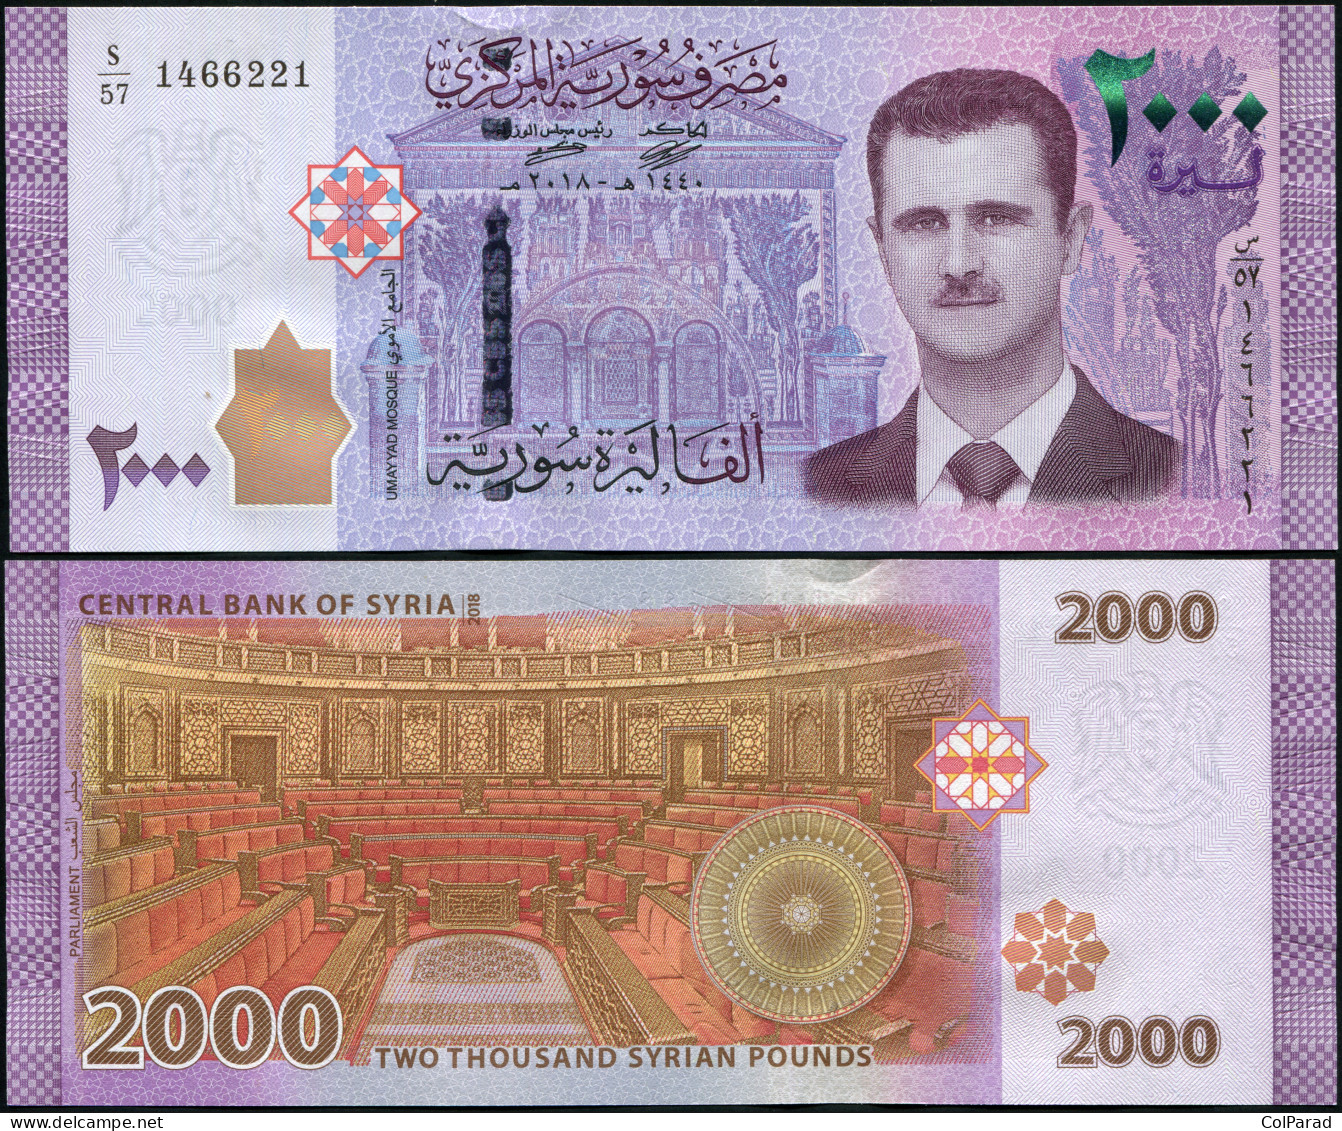 SYRIA 2000 SYRIAN POUNDS - 2018 - Paper Unc - P.117c Banknote - Siria